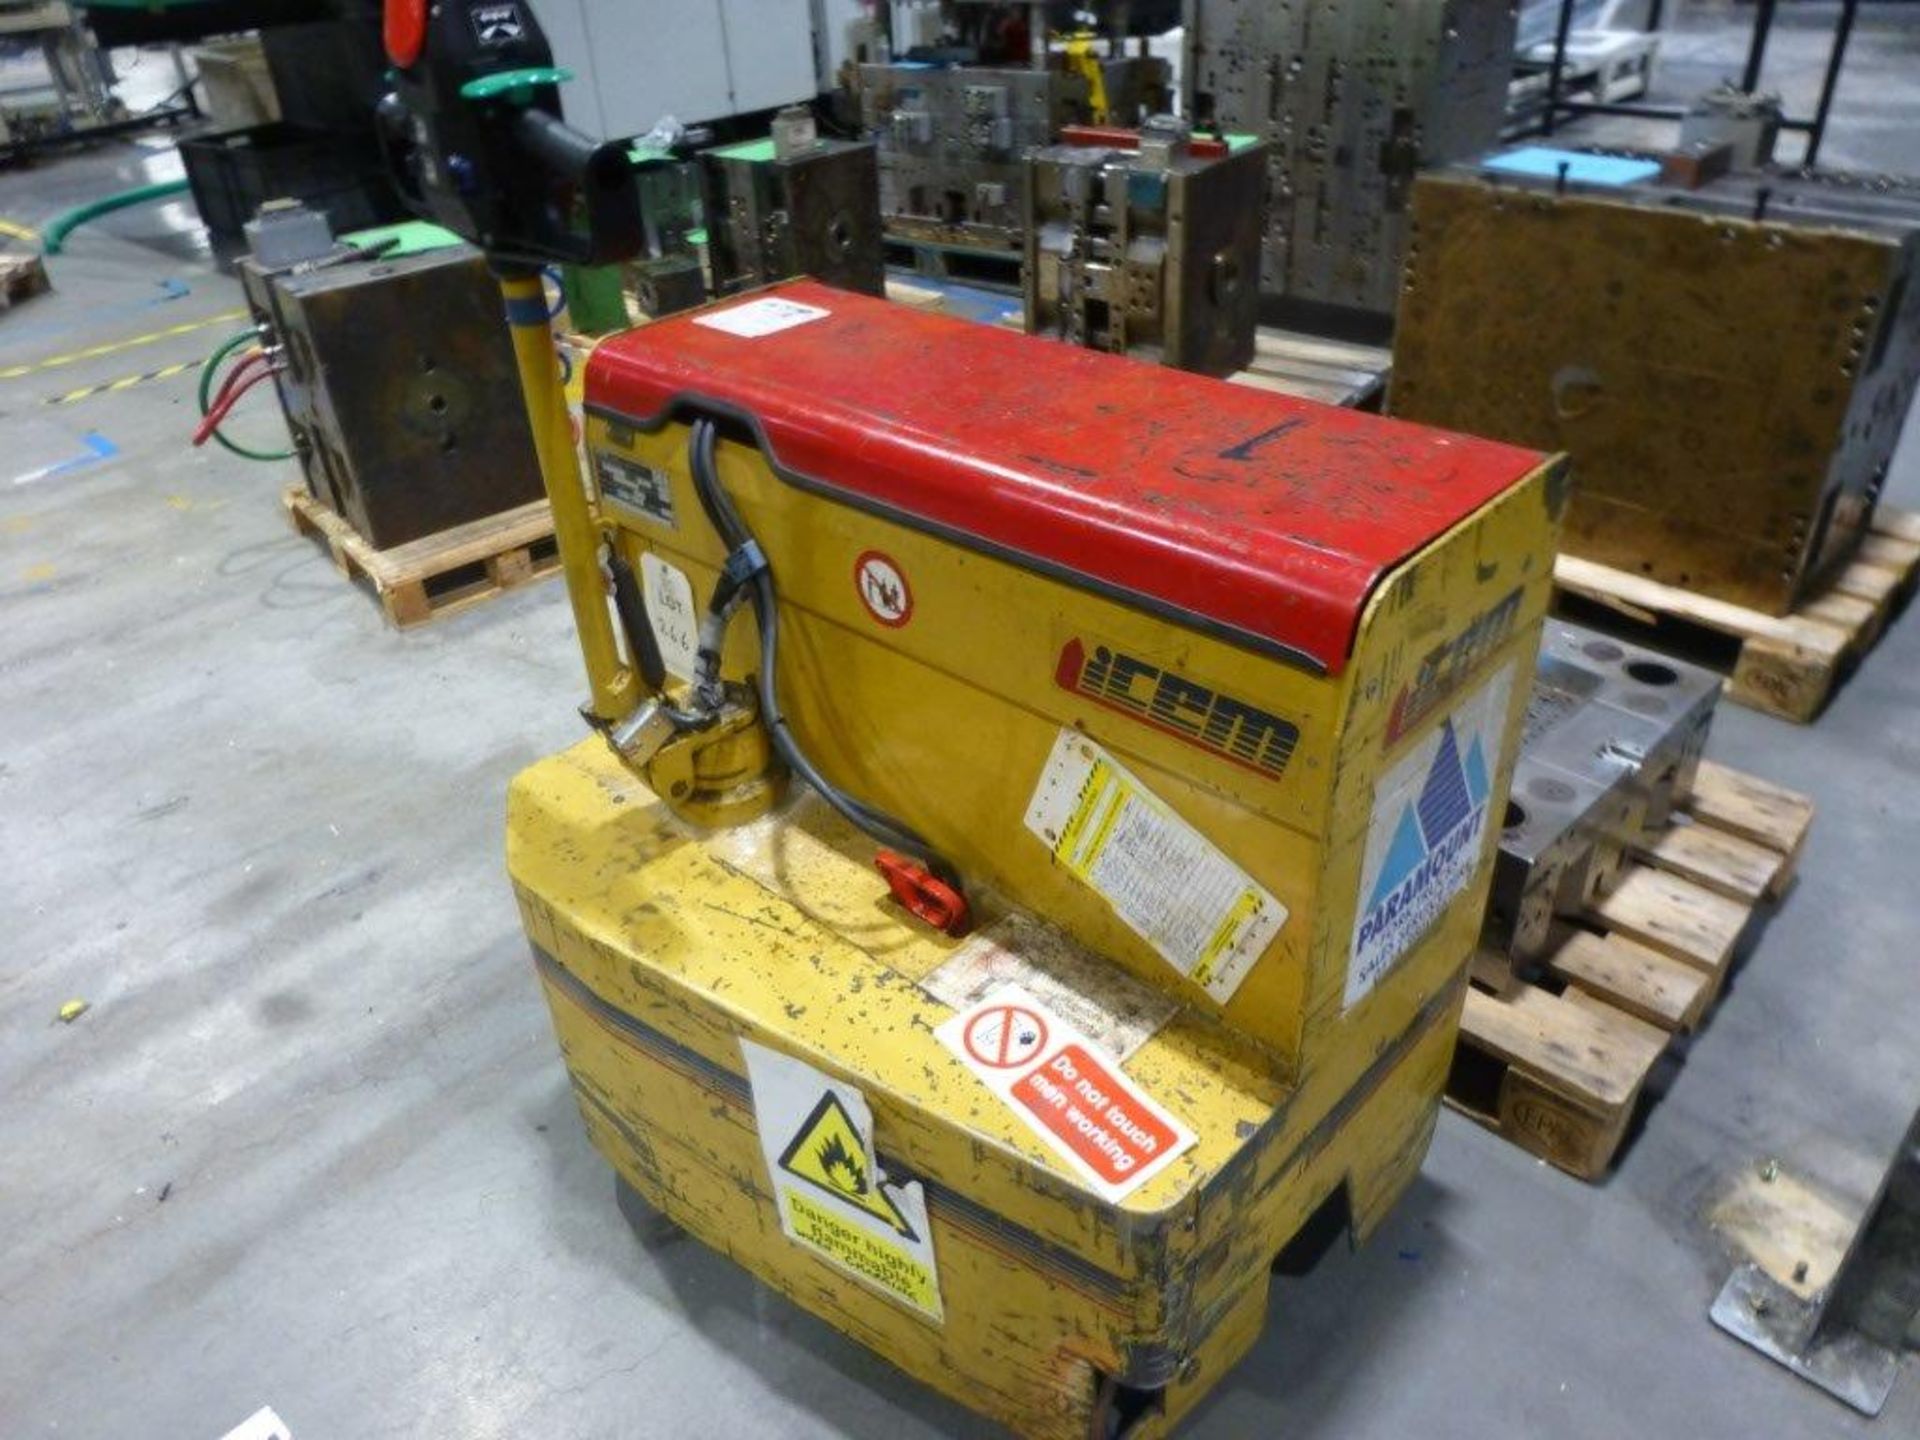 Icem GL50 5000kG pedestrian operated electric pallet truck, serial No 13193 (2000) - Image 2 of 3